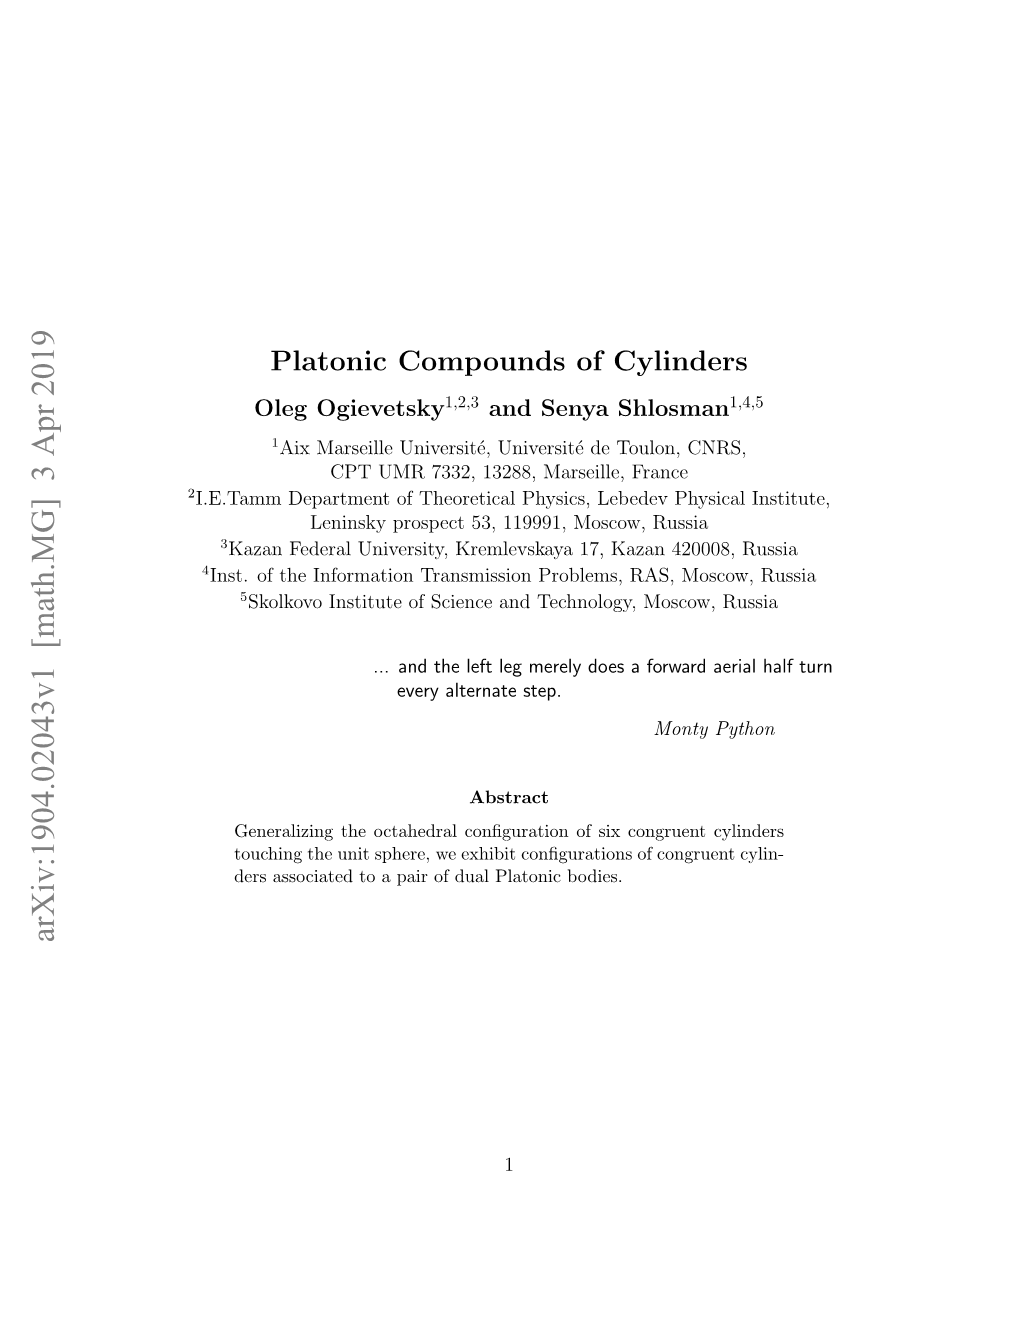 Platonic Compounds of Cylinders